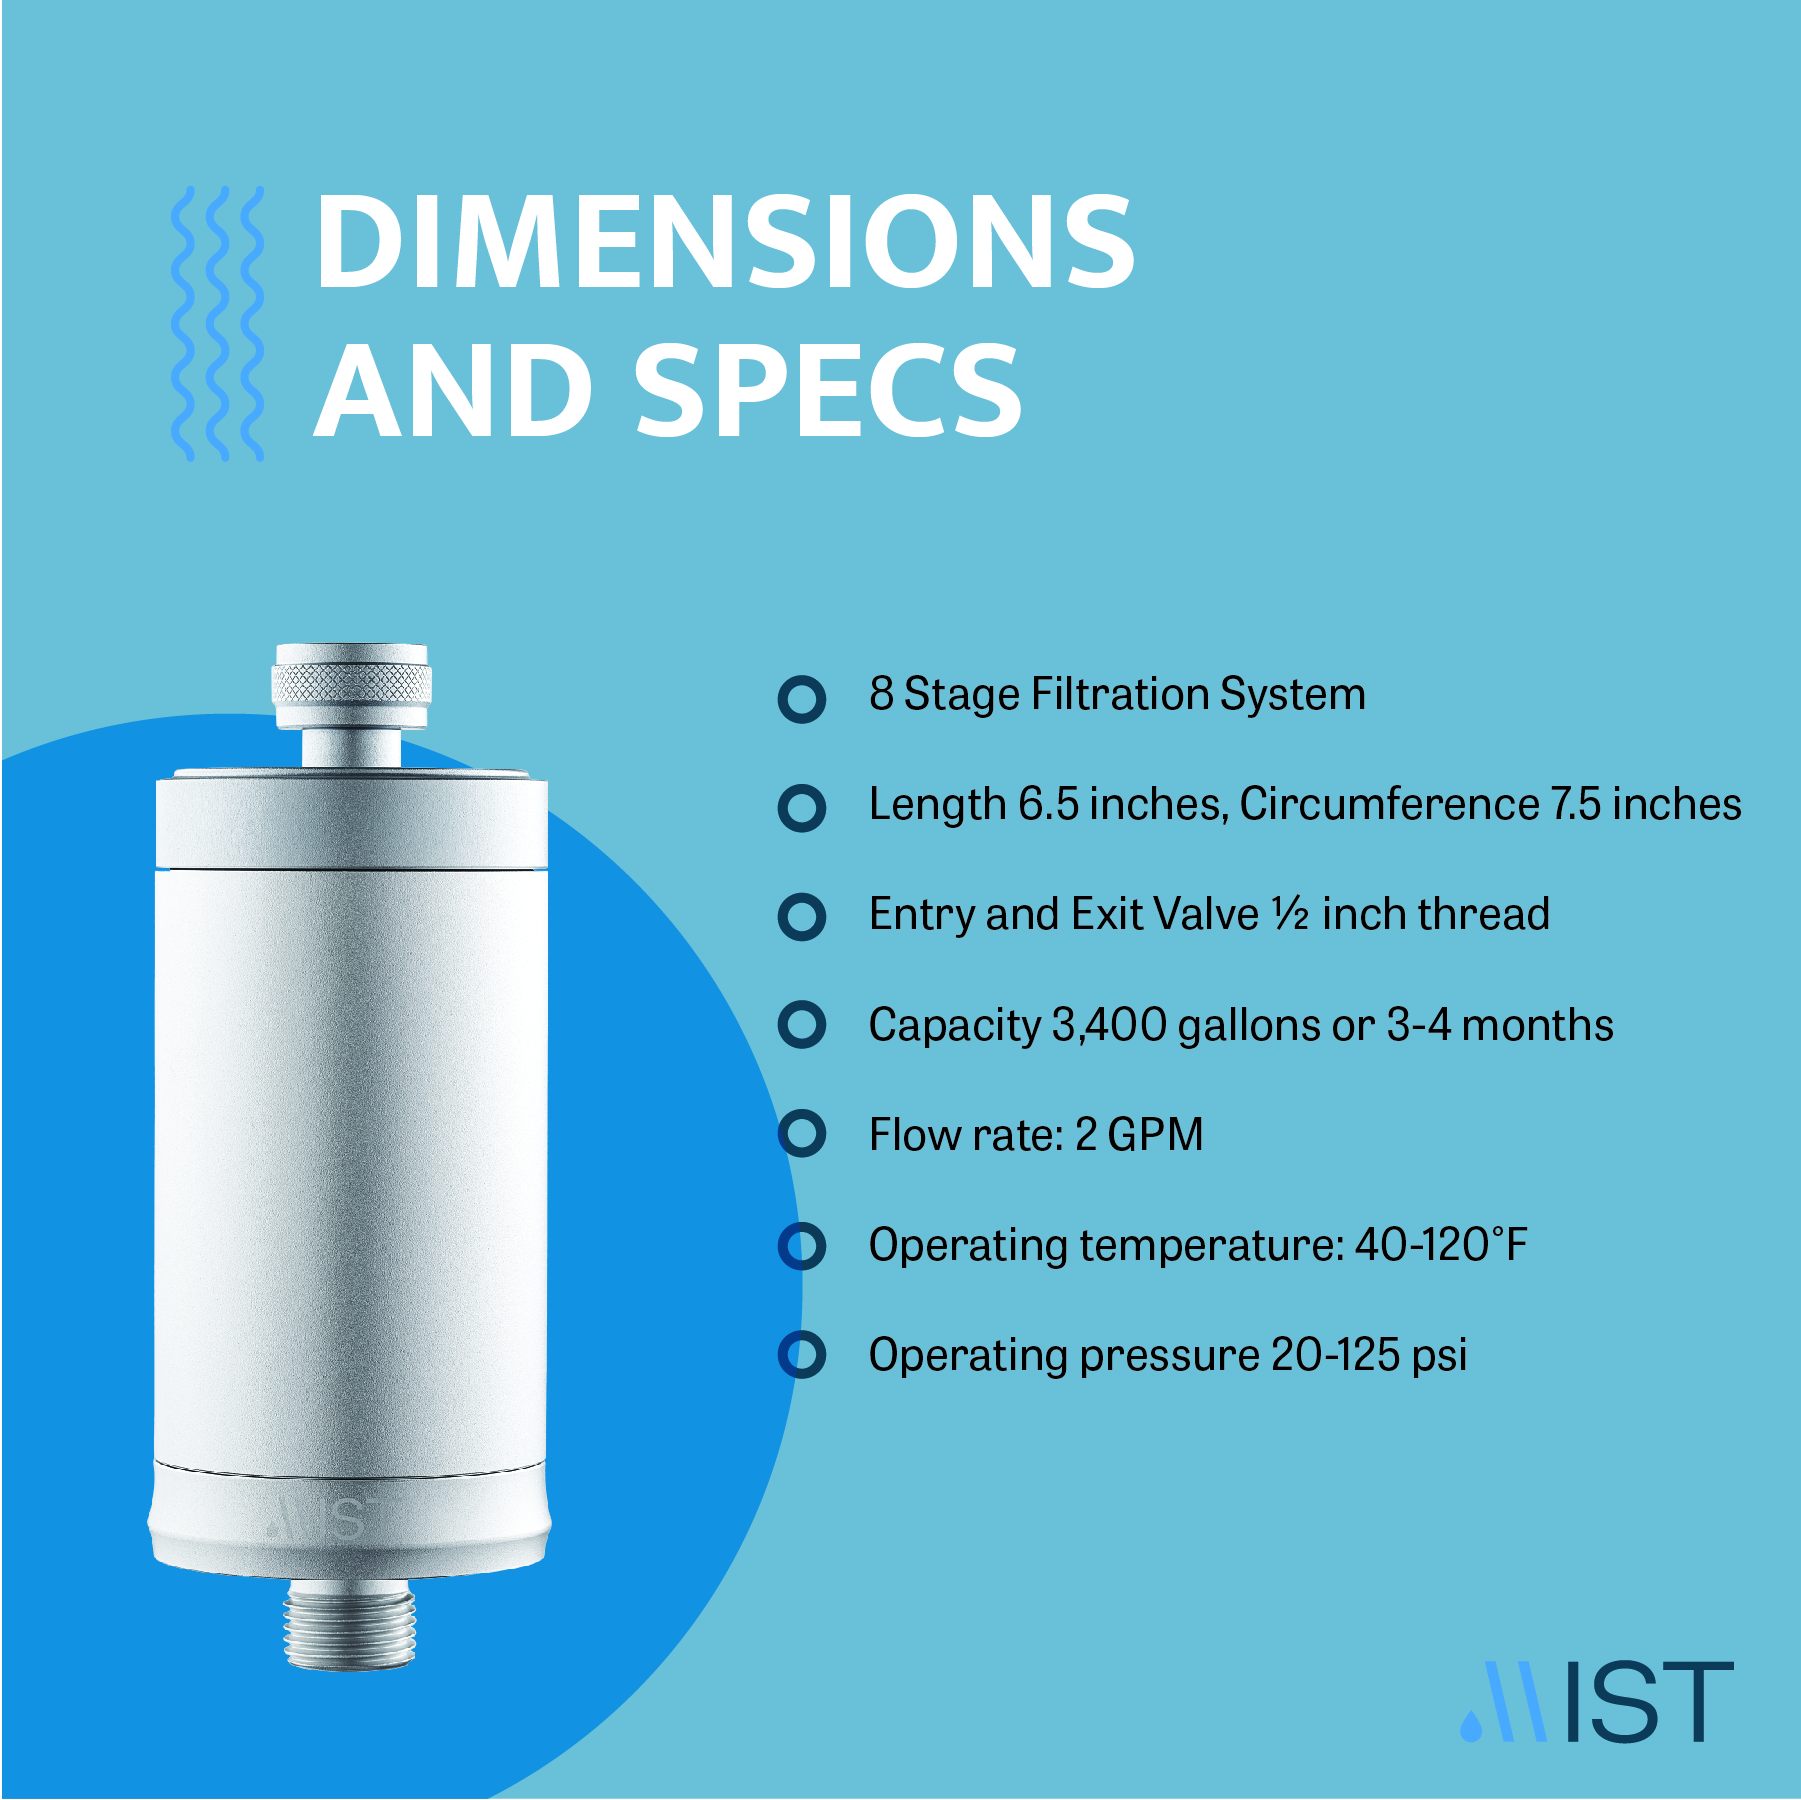 Mist Aluminum Shower Filter, 8 Stage Filtration System, Effectively Removes Chlorine and Bad Odor, Easy Install